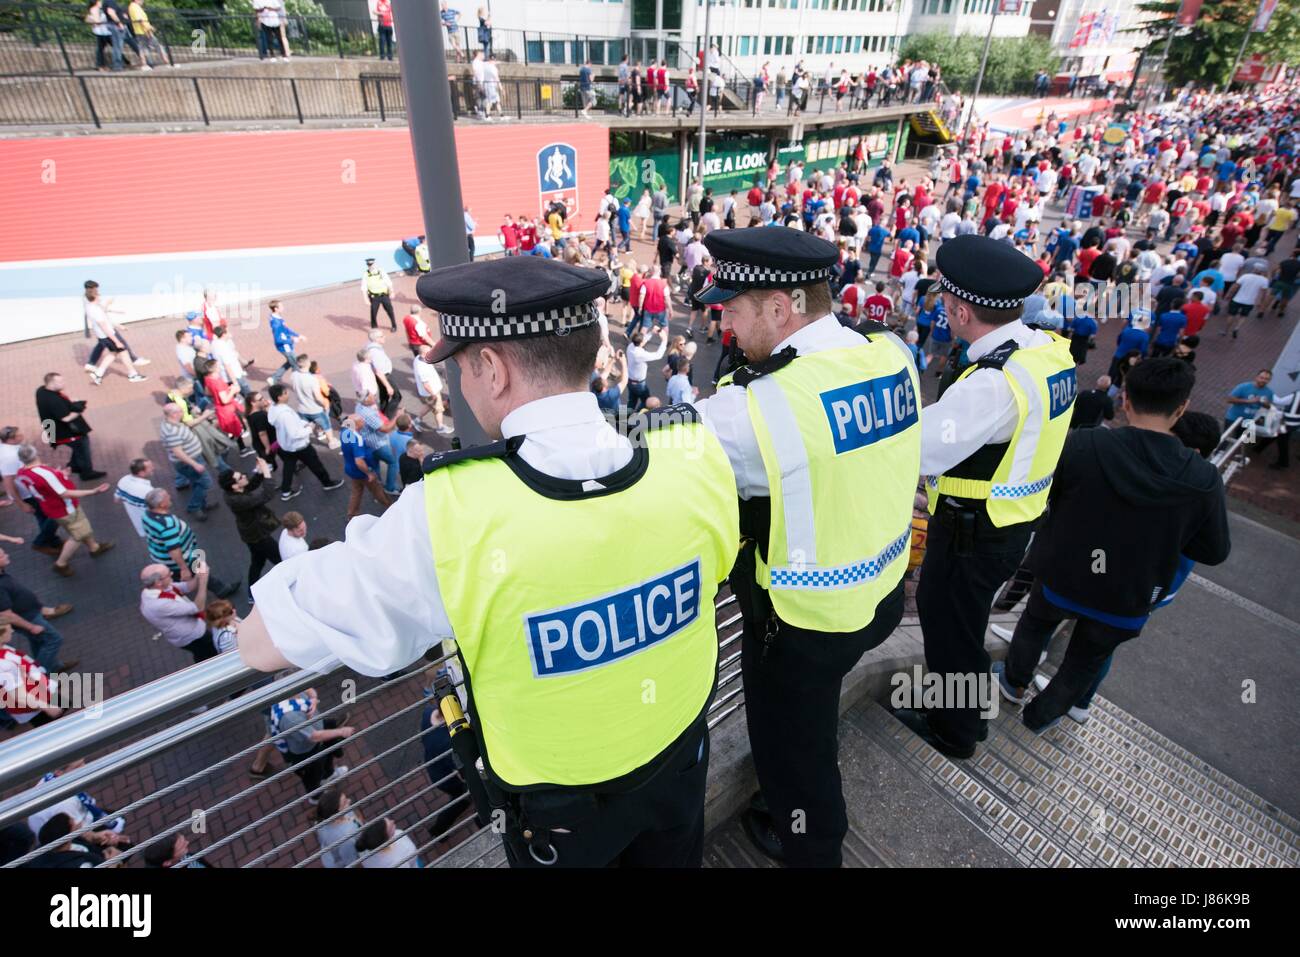 London, Britain. 27th May, 2017. Policemen are on patrol as security precautions are stepped up for Arsenal and Chelsea fans arriving at Wembley stadium for the FA Cup final in London, Britain, on May 27, 2017. The security level was in response to Manchester Arena bombing when 22 people died and 66 people were injured in one of the most deadly attacks in the UK. Credit: Ray Tang/Xinhua/Alamy Live News Stock Photo